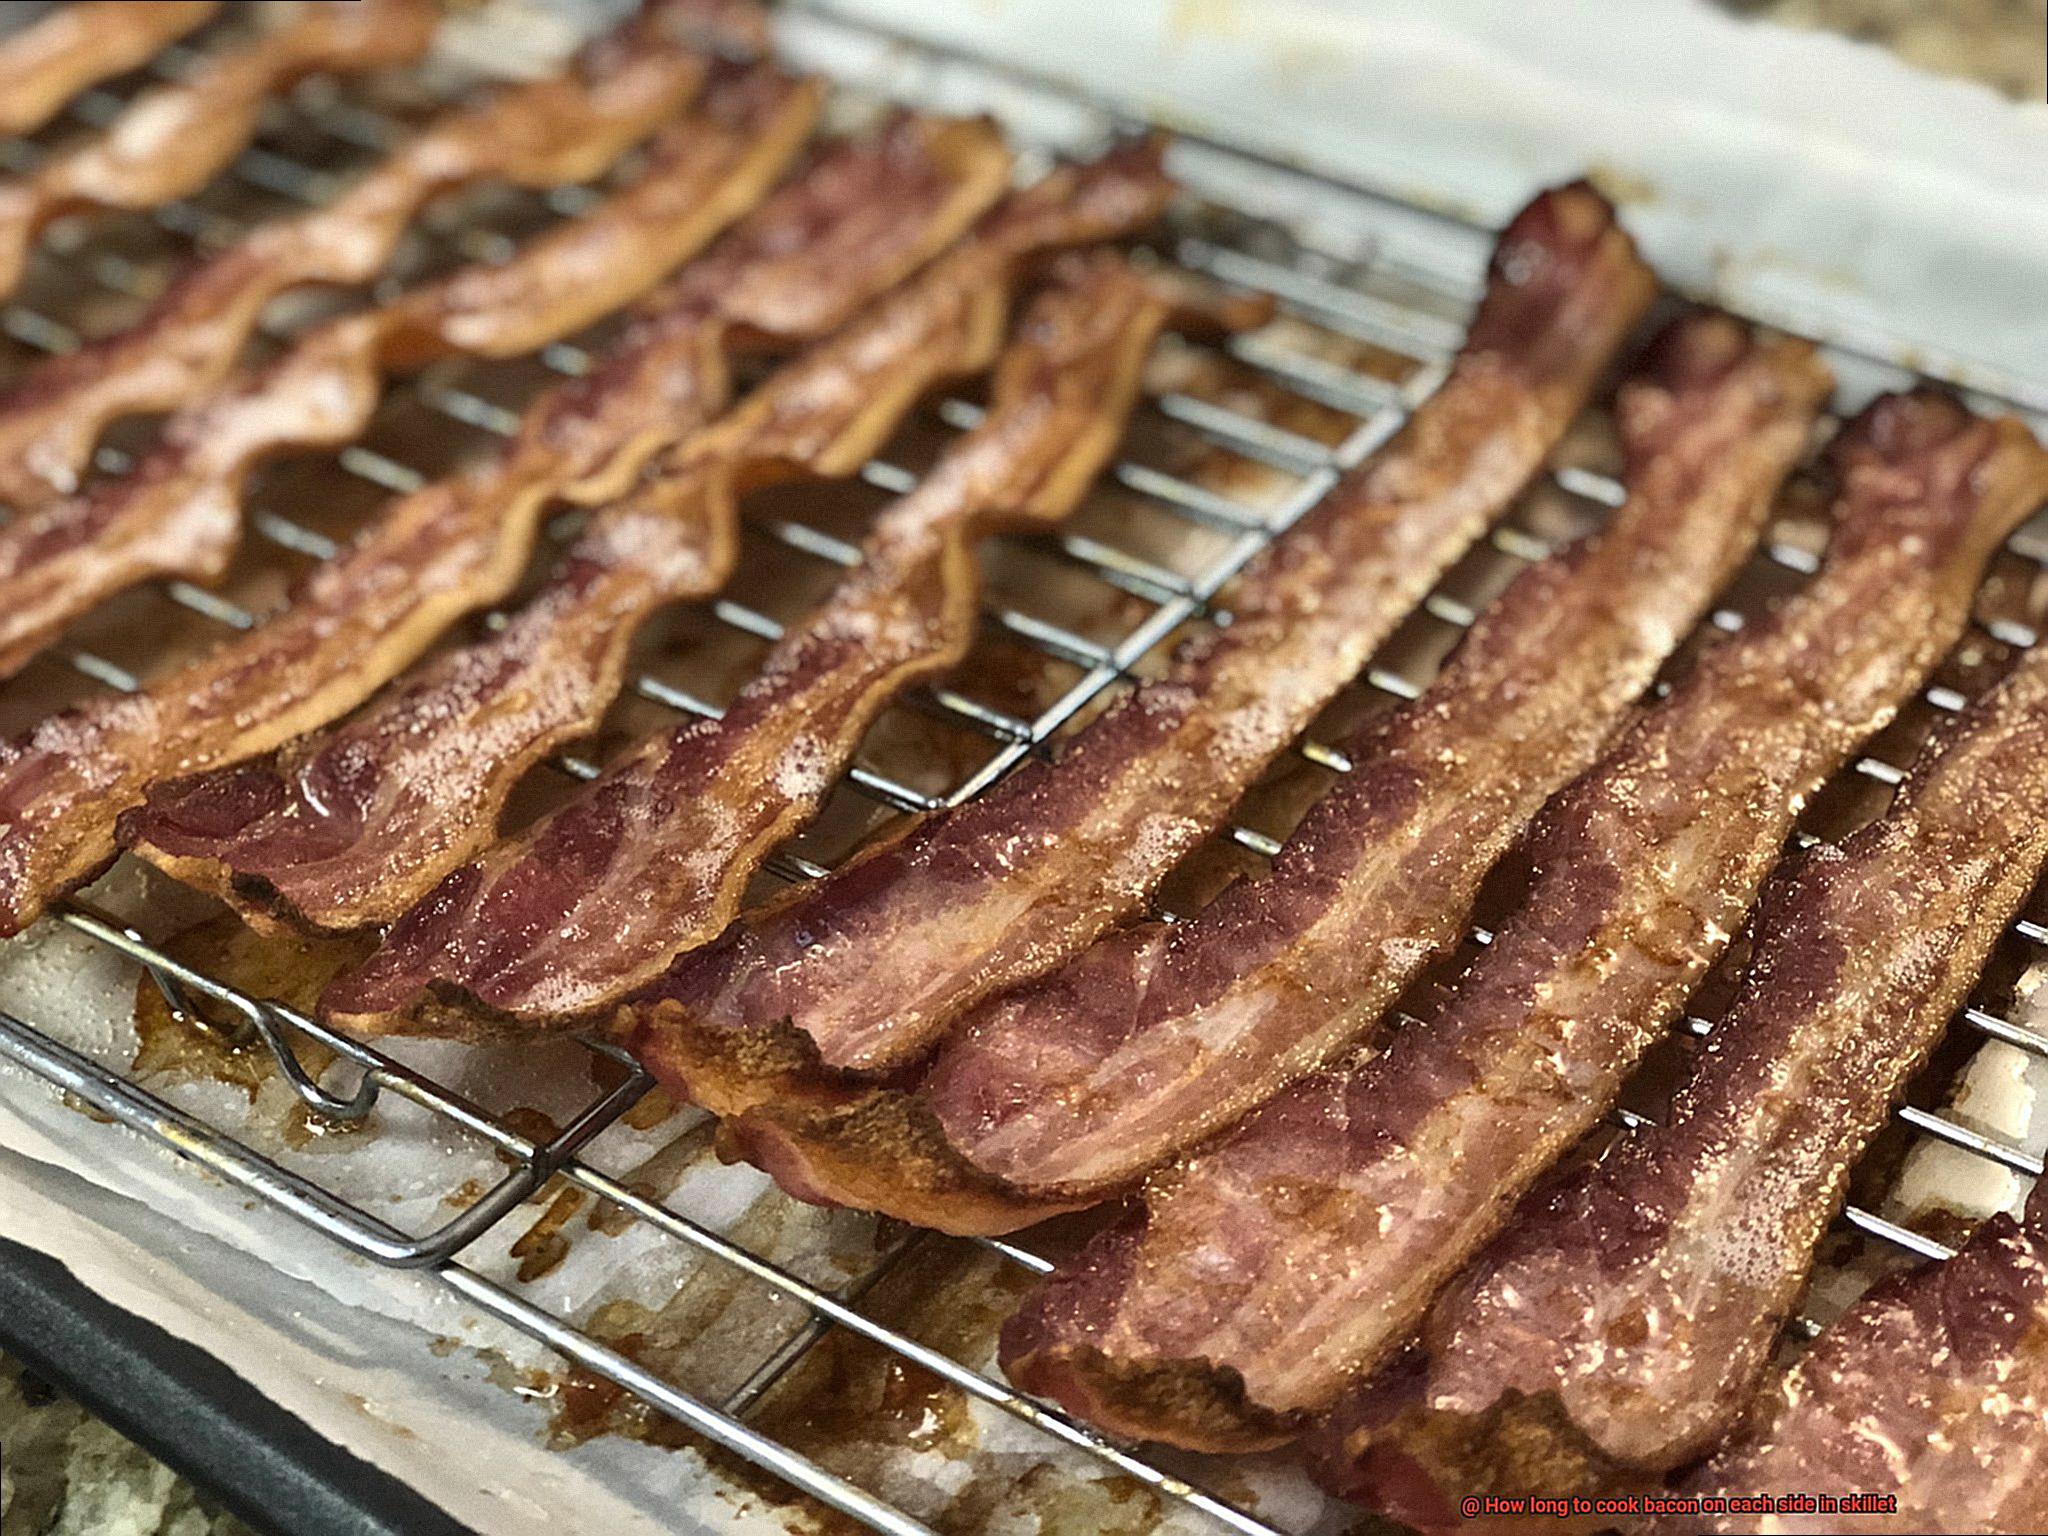 How long to cook bacon on each side in skillet-7